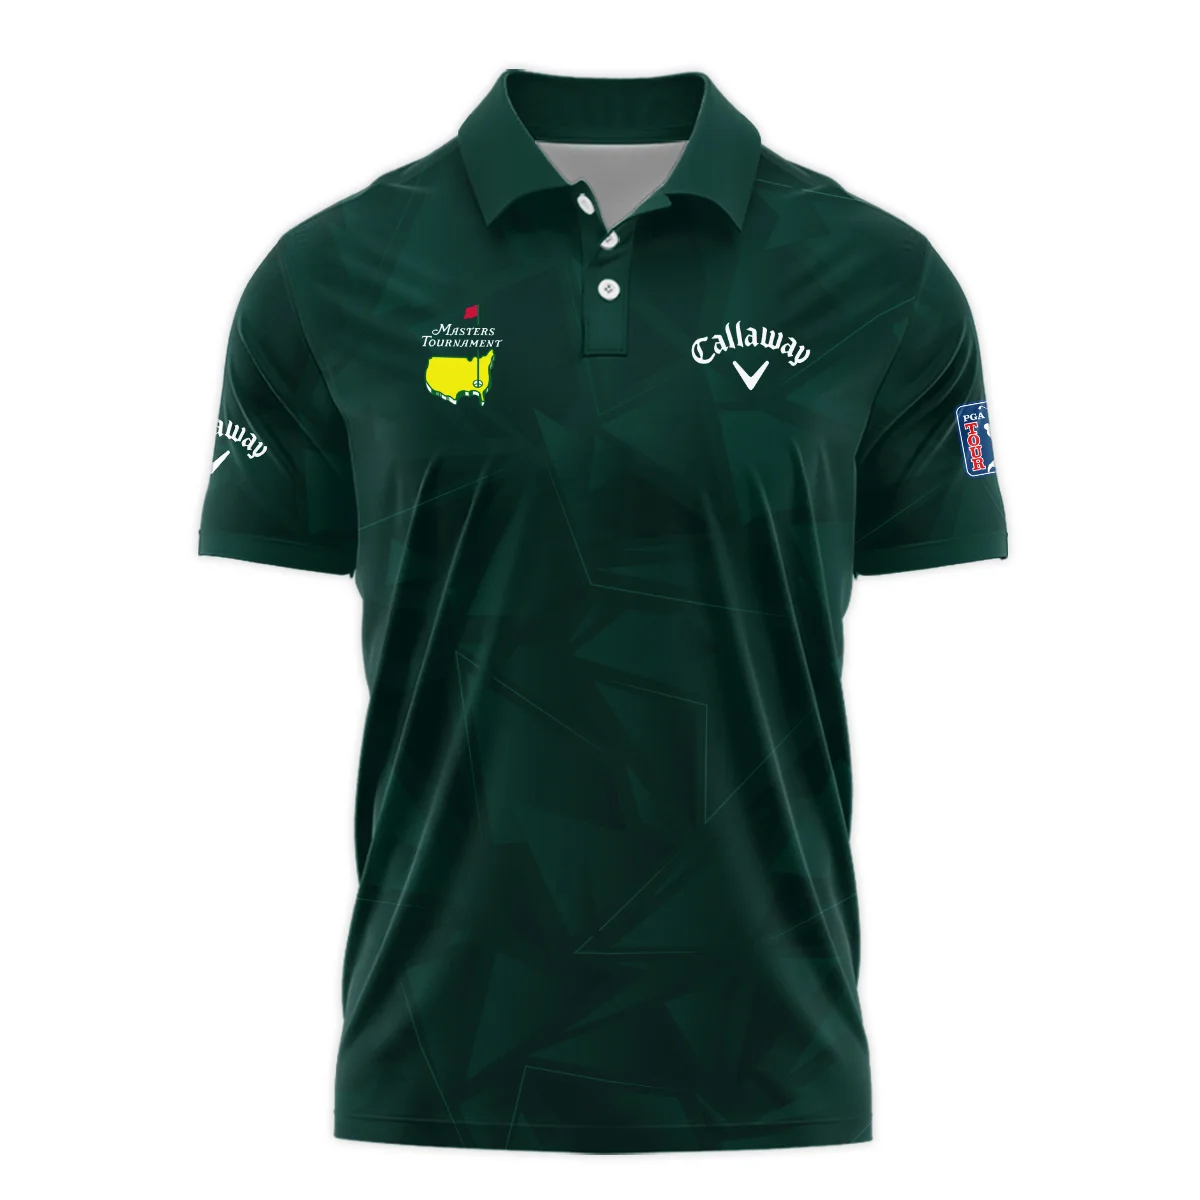 Dark Green Abstract Sport Masters Tournament Callaway Polo Shirt Style Classic Polo Shirt For Men